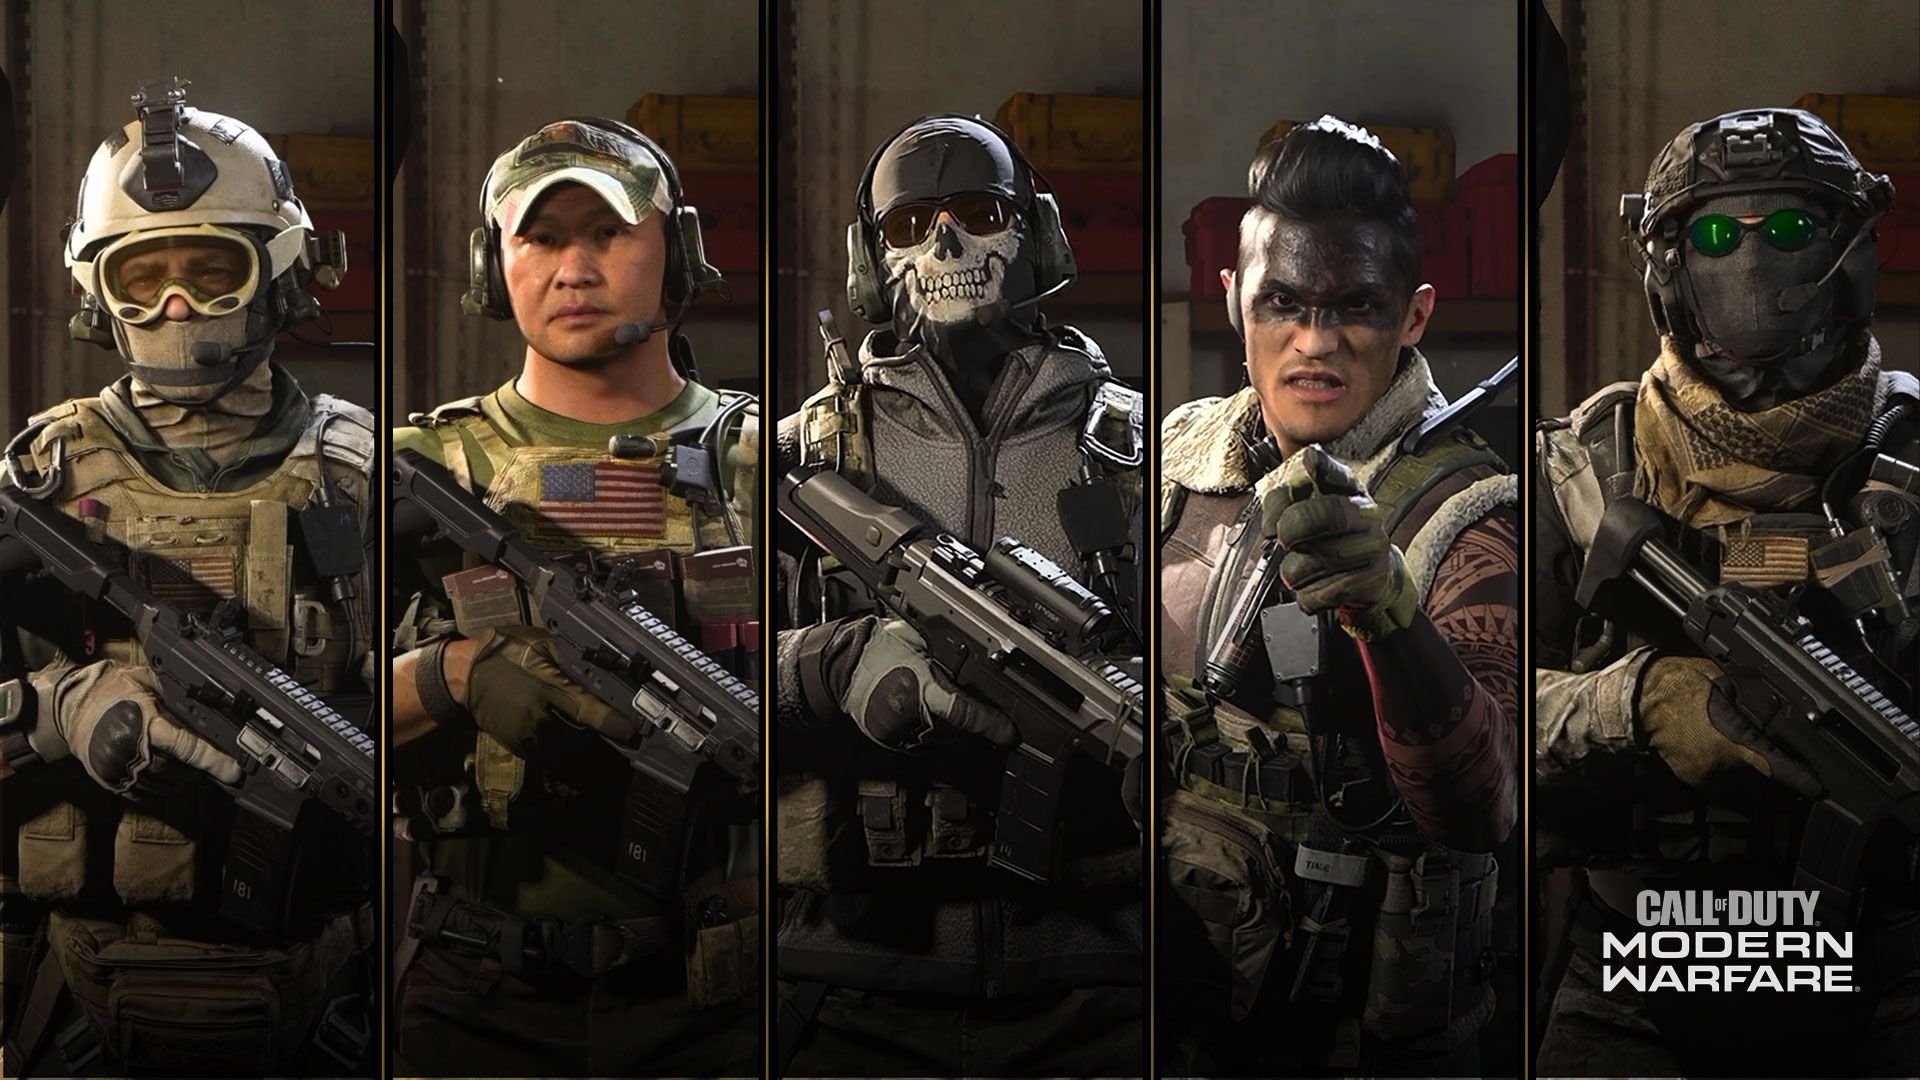 The Ghost Pack Contingency Bundle features iconic items for the SAS Operator including the 'Classic Ghost' skin